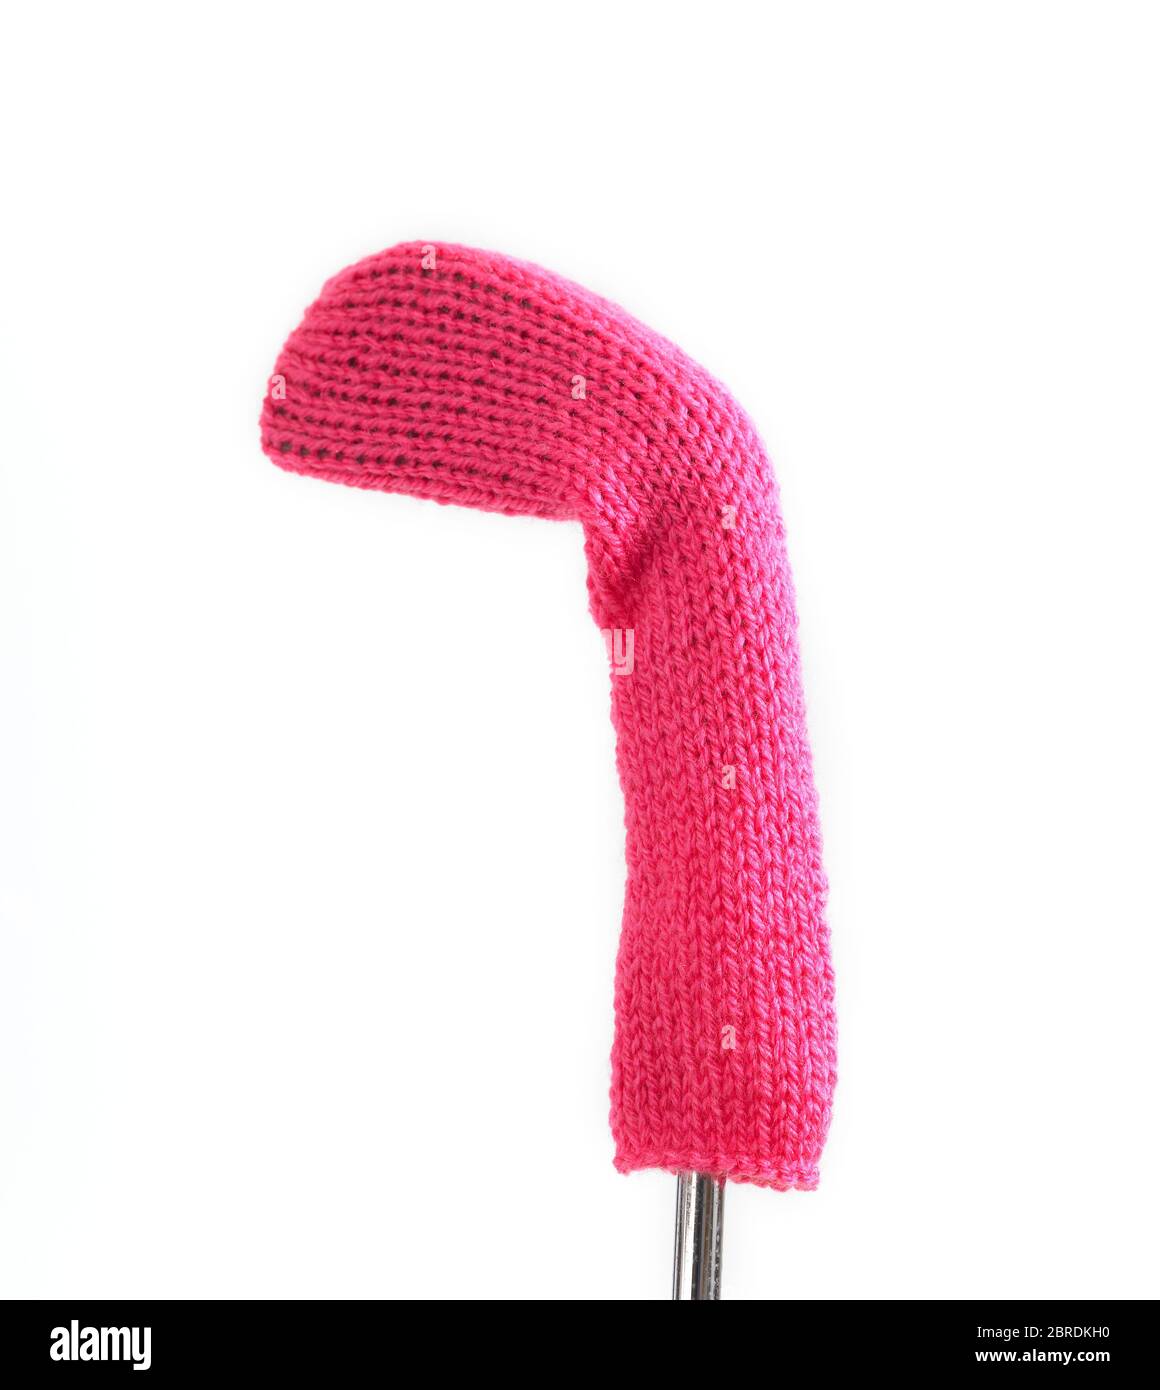 Knitted woollen golf club cover Stock Photo